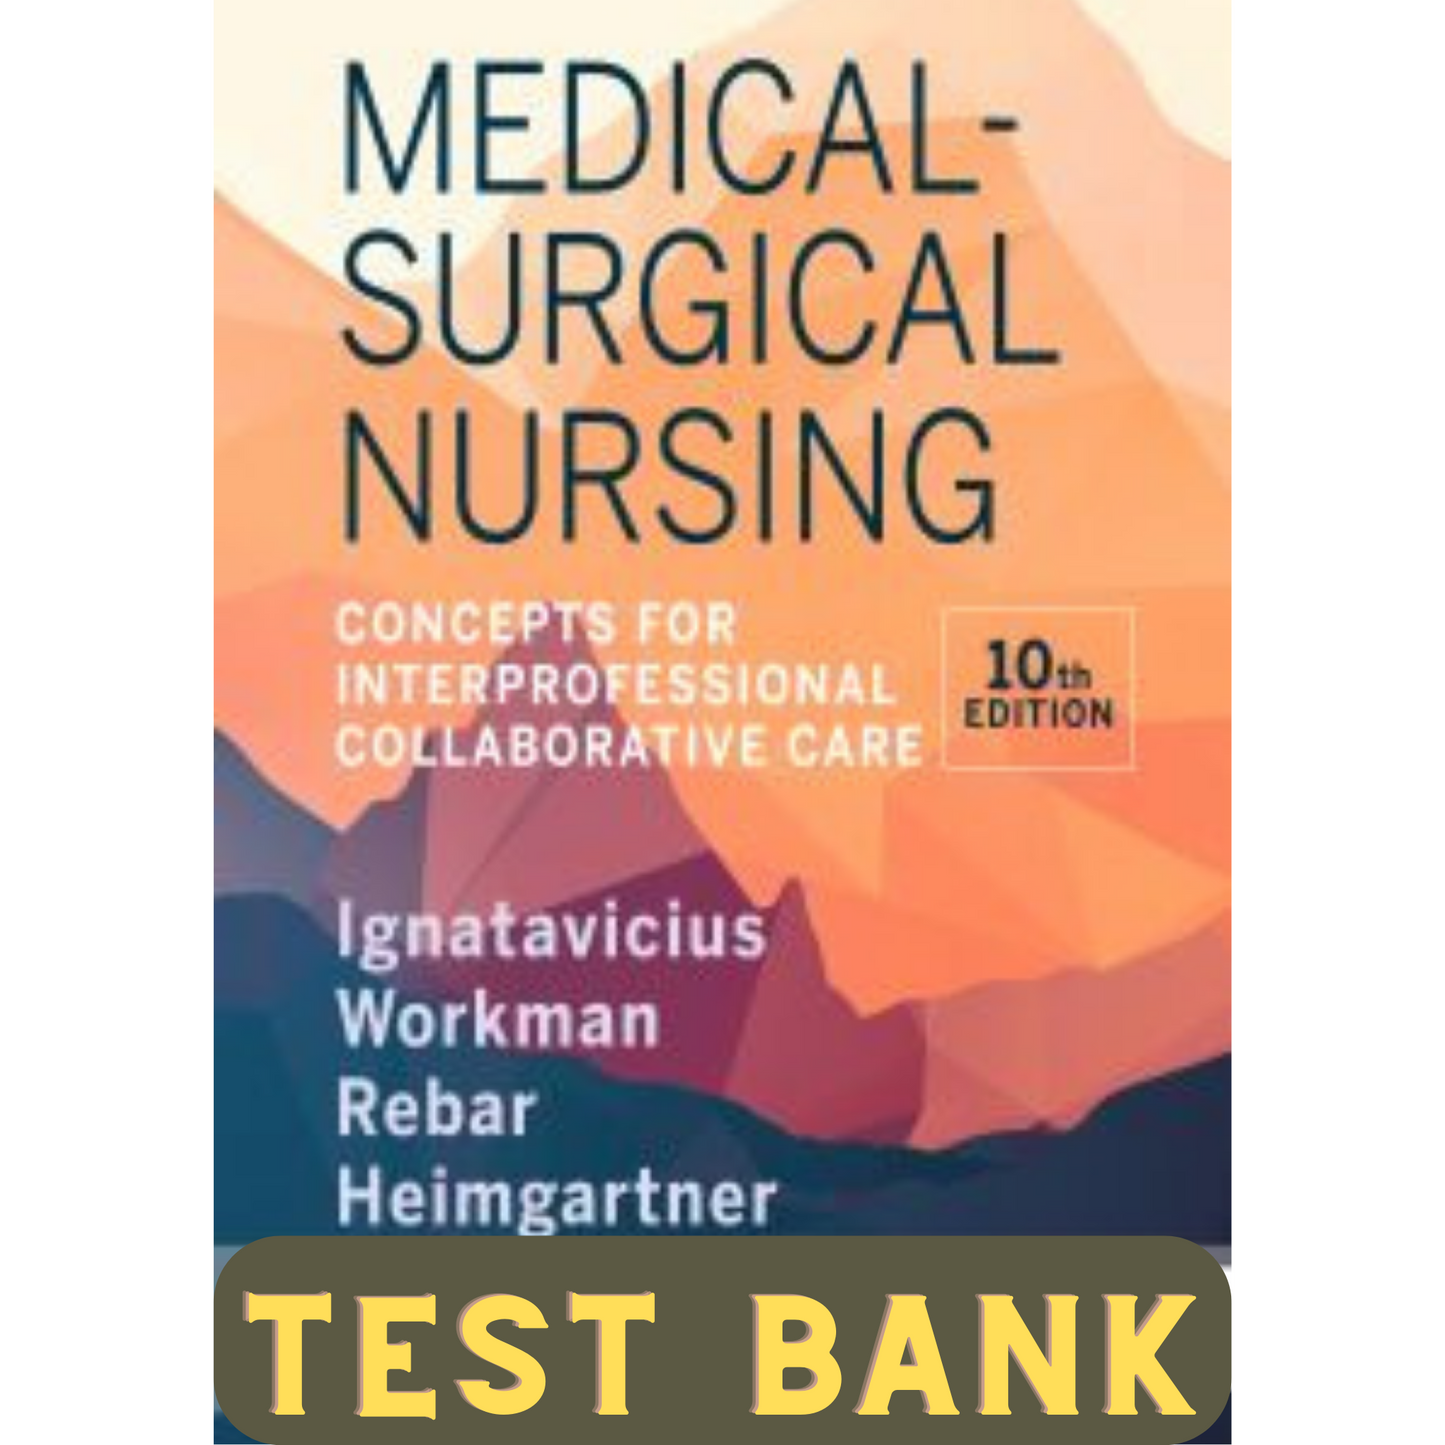 Medical-Surgical Nursing: Concepts for Interprofessional Collaborative Care 10th Edition TEST BANK